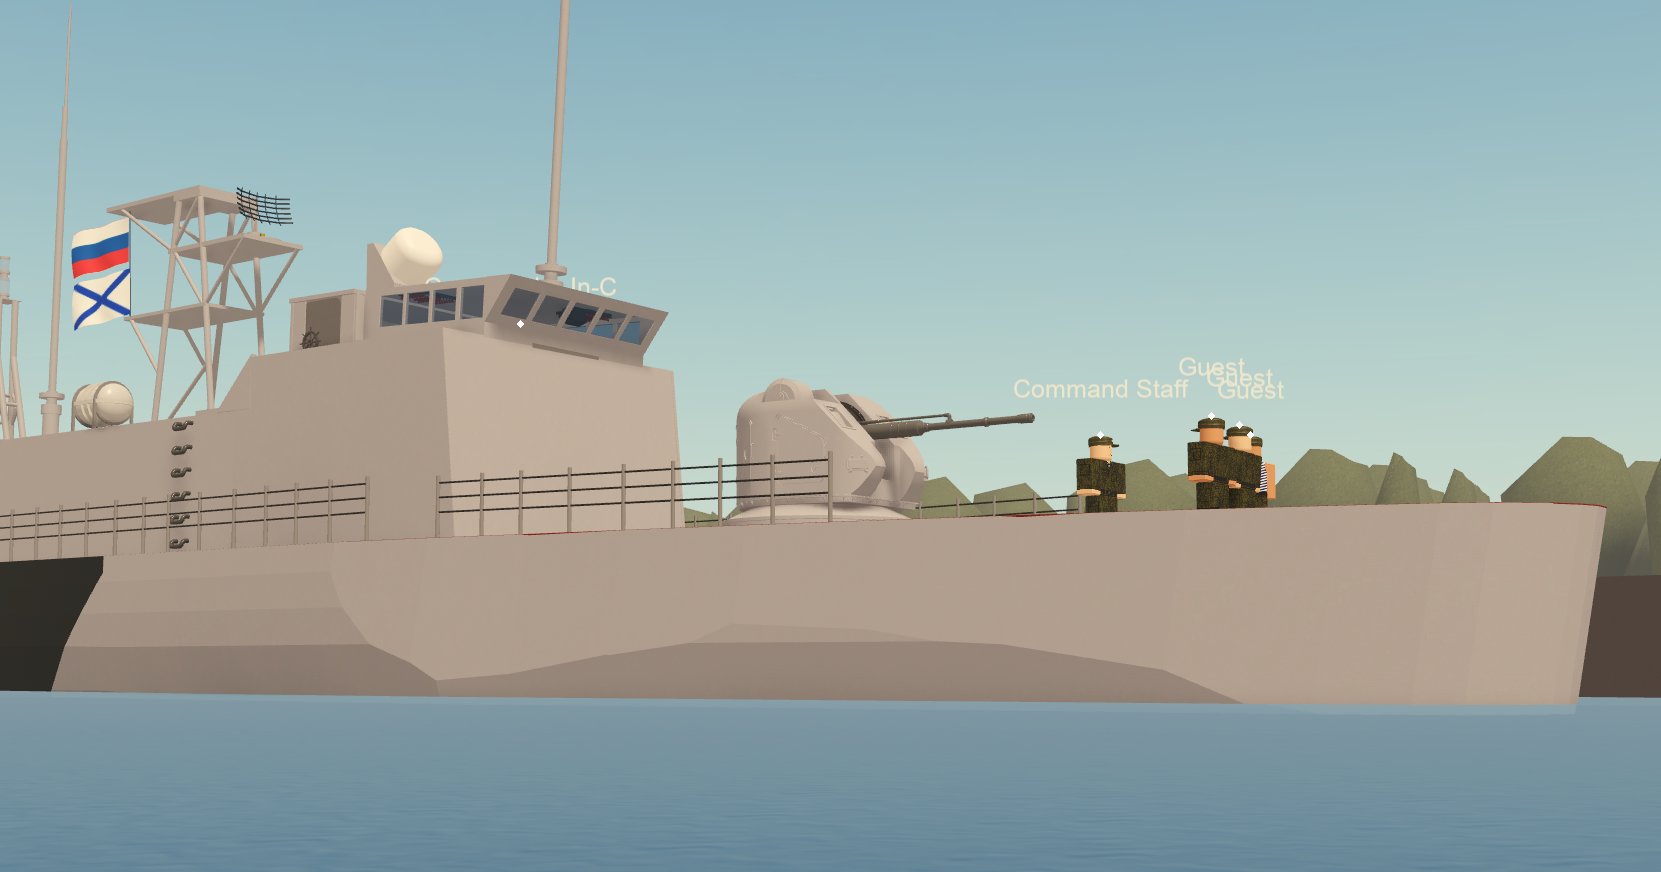 Channel One Russia Roblox On Twitter The Russian Navy Has Been Seen Recently Drilling And Recruiting The Navy Has Seen A Massive Boost In Development And Activity Since Its Recommissioning Https T Co Hr782bgekt - moscowrussia roblox